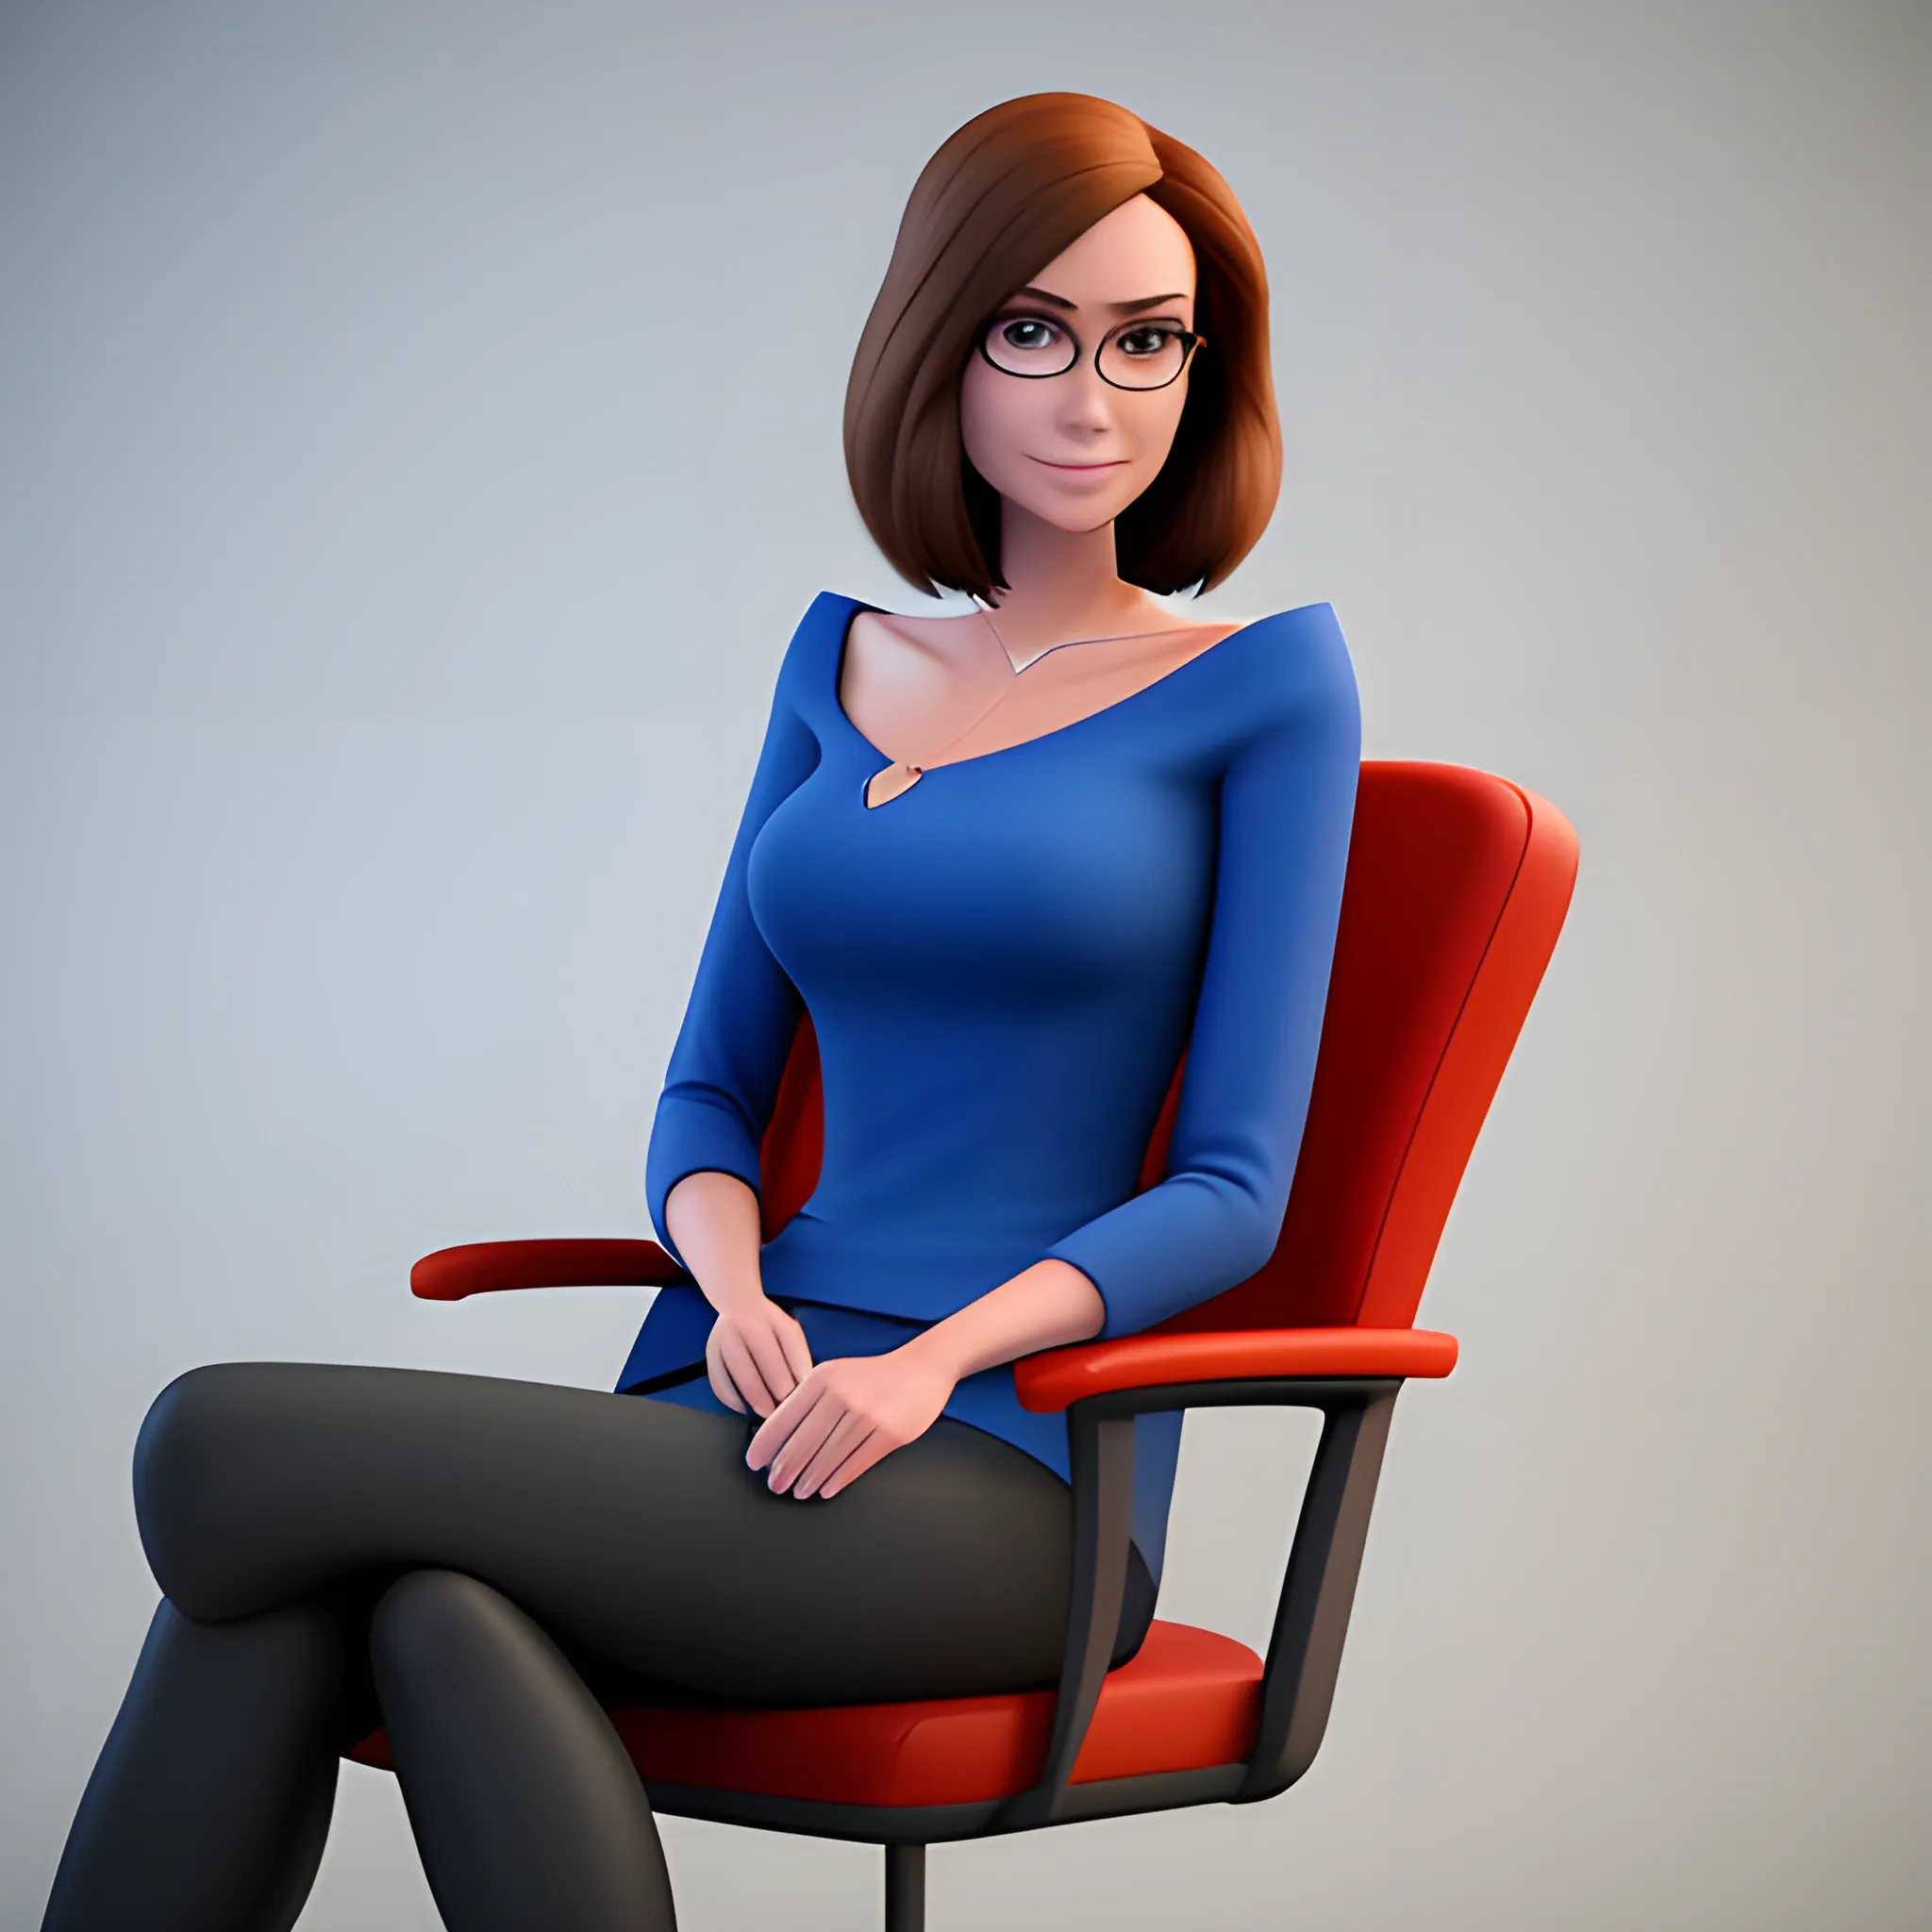 A Disney Pixar Studios character, a girl with shoulder-length hair and glasses, sitting on a chair inside a classroom, looking straight ahead, 3D rendering